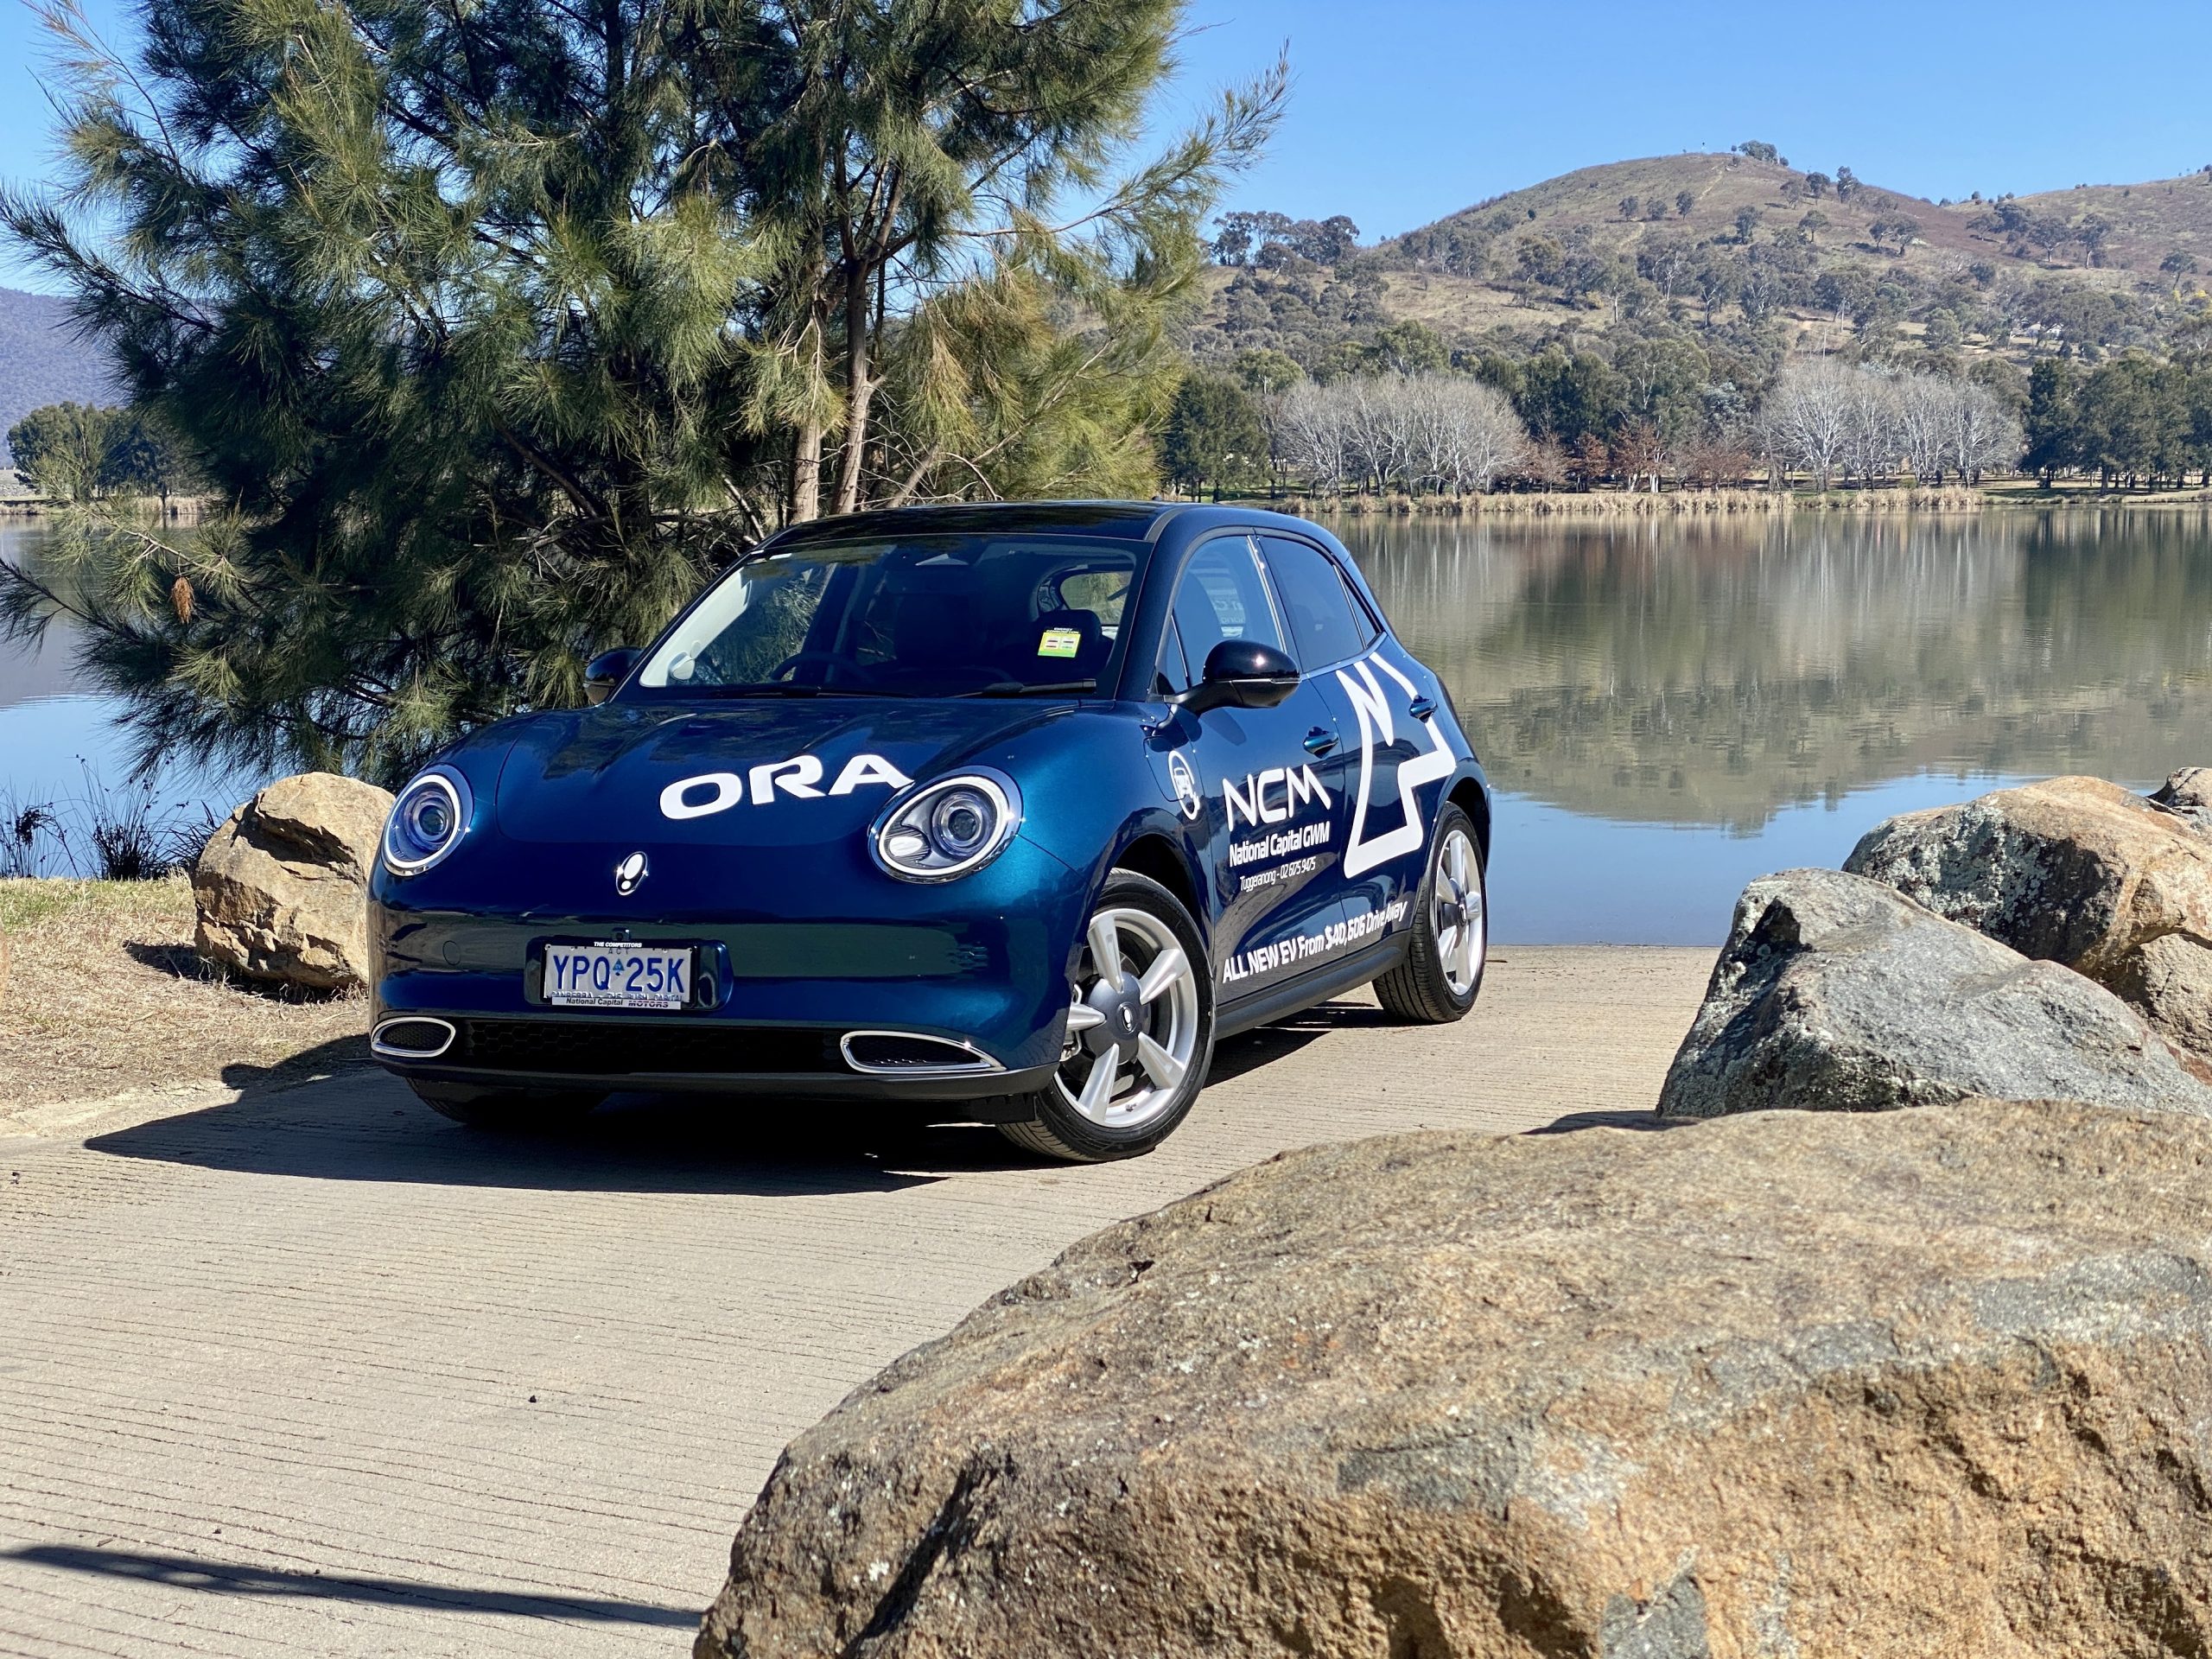 The GWM Ora is the third cheapest EV in Australia right now. What's it like?